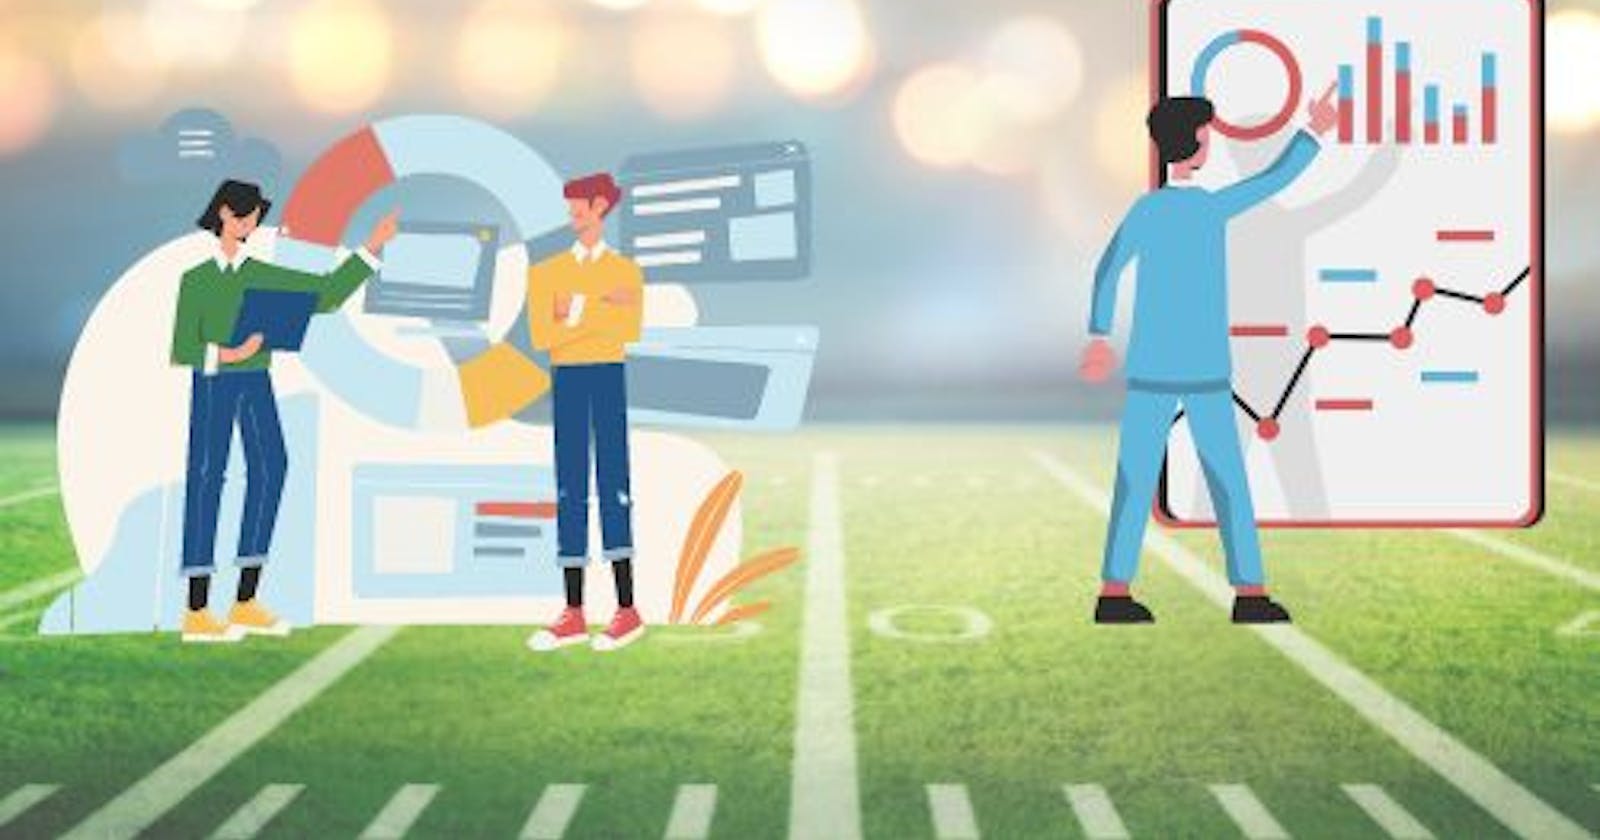 How Sports Analytics Is Changing The Game